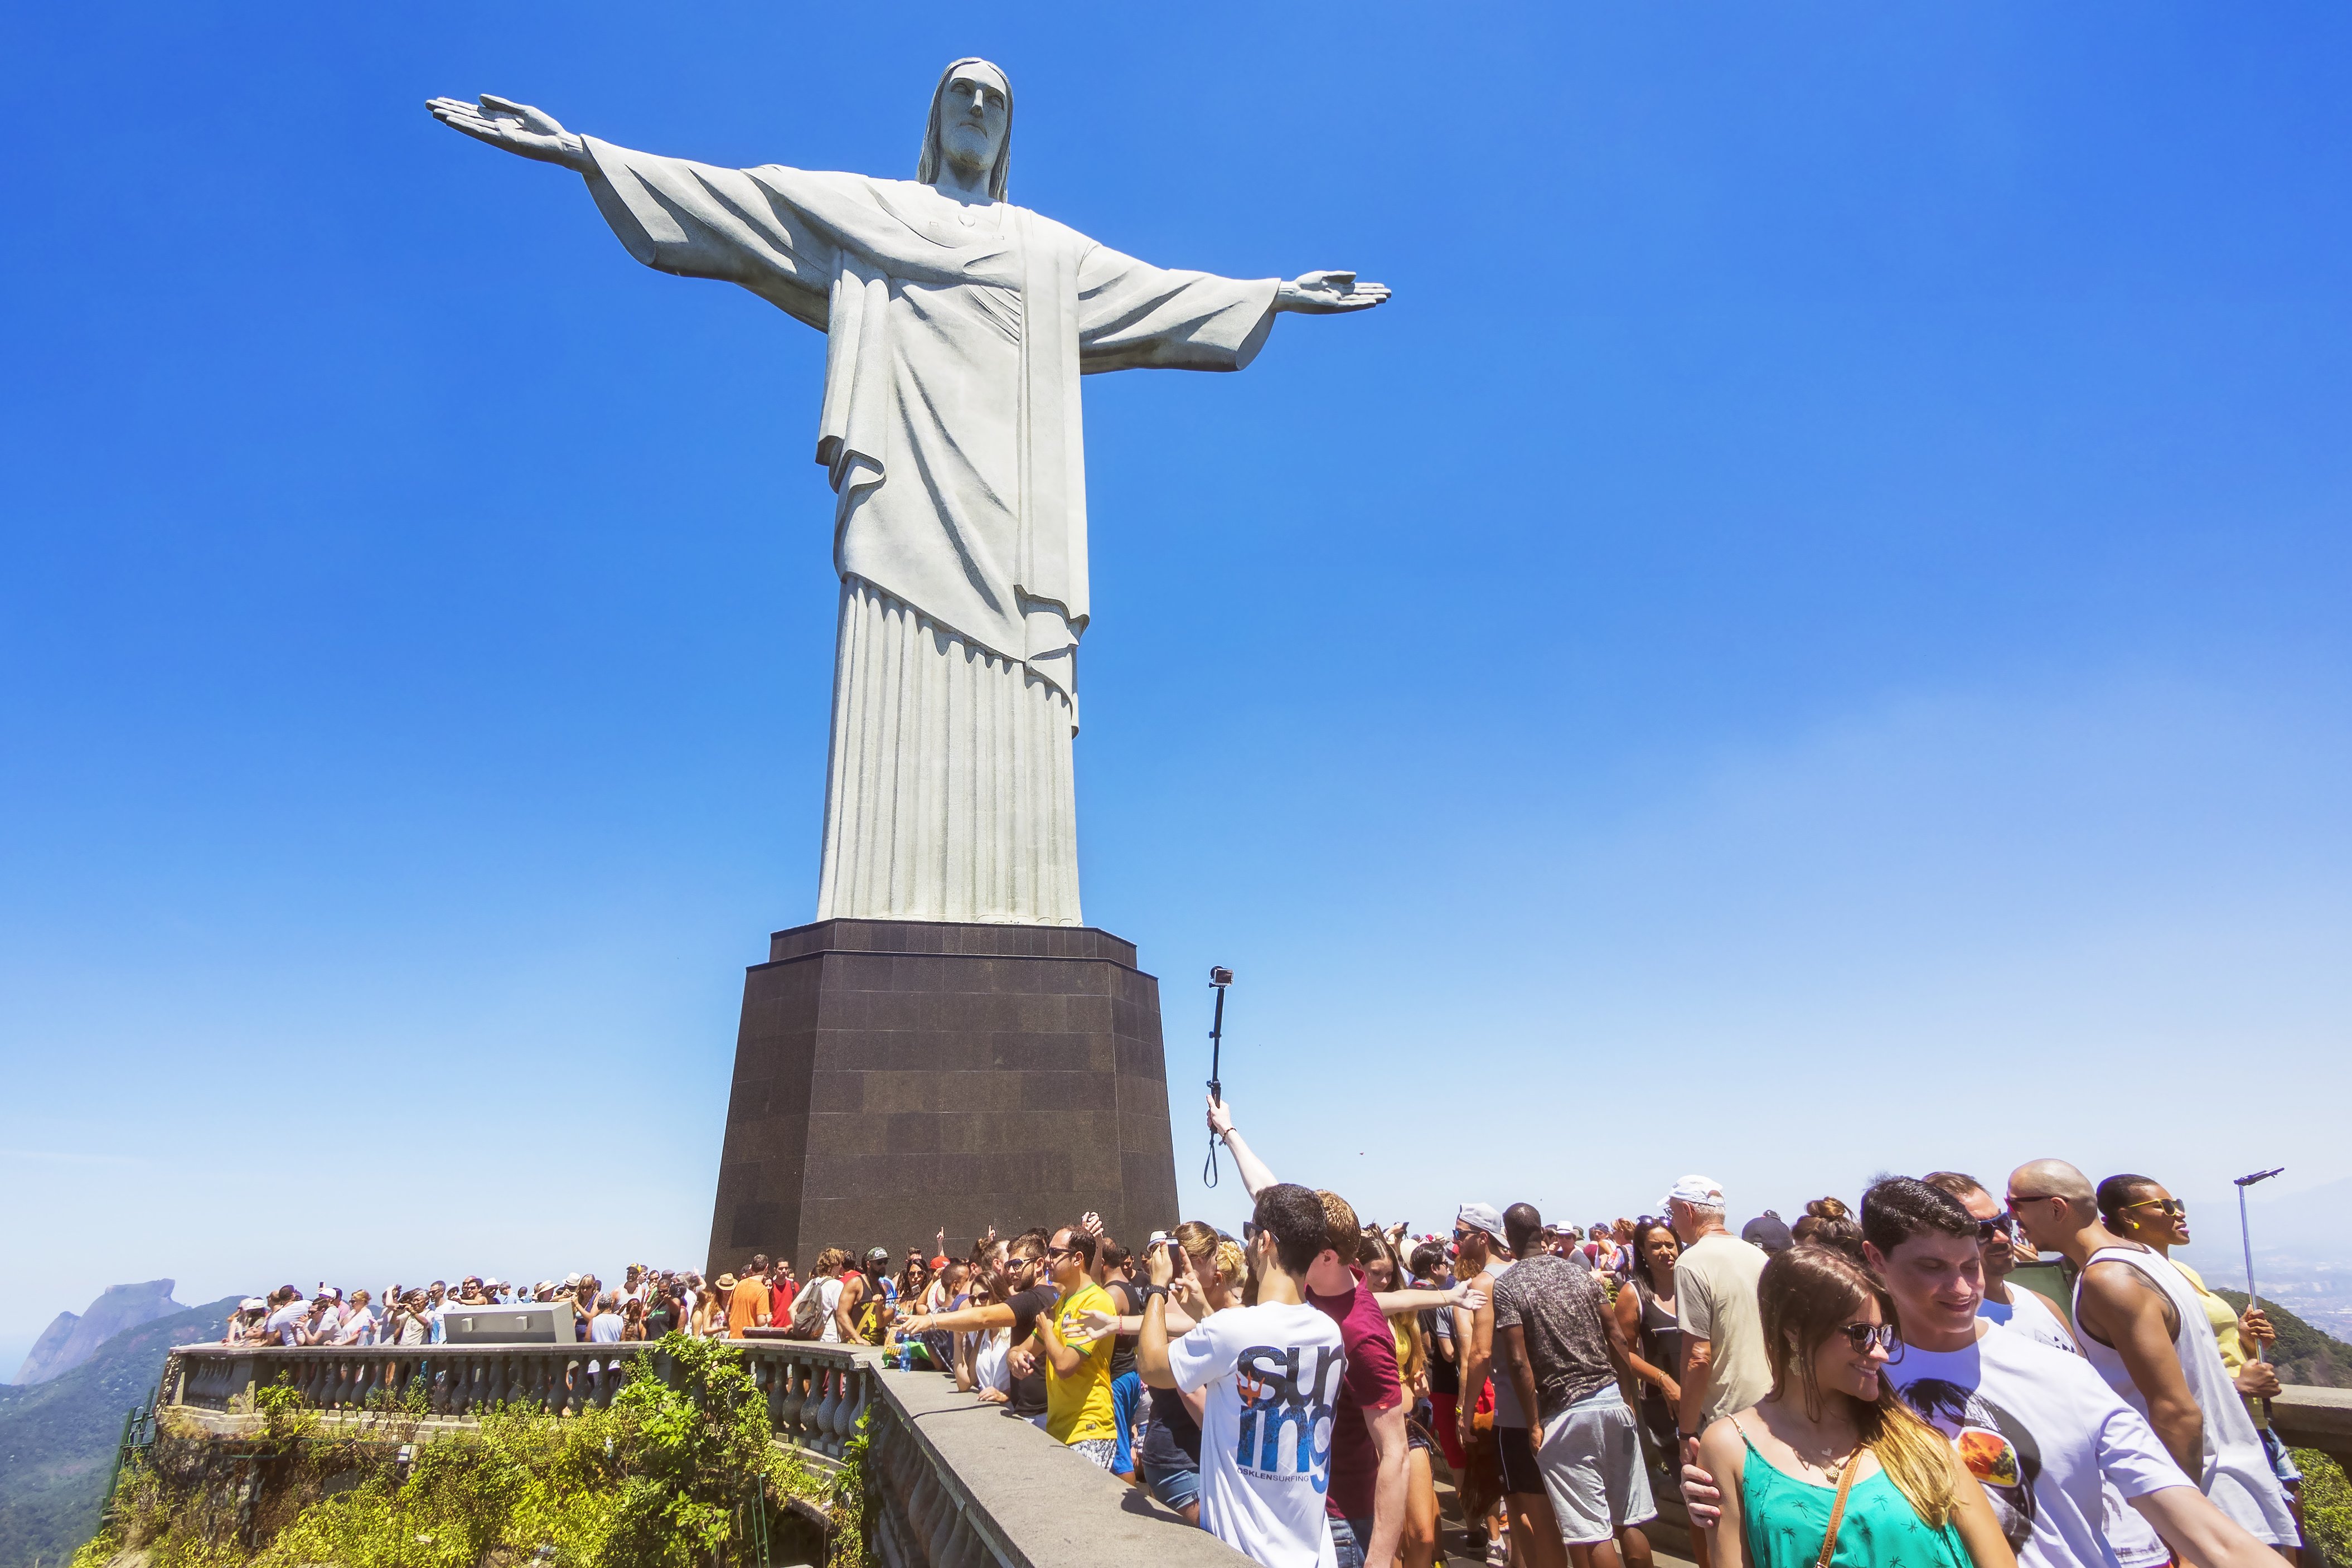 We’ve arranged a guided tour to the statue of Christ the Redeemer